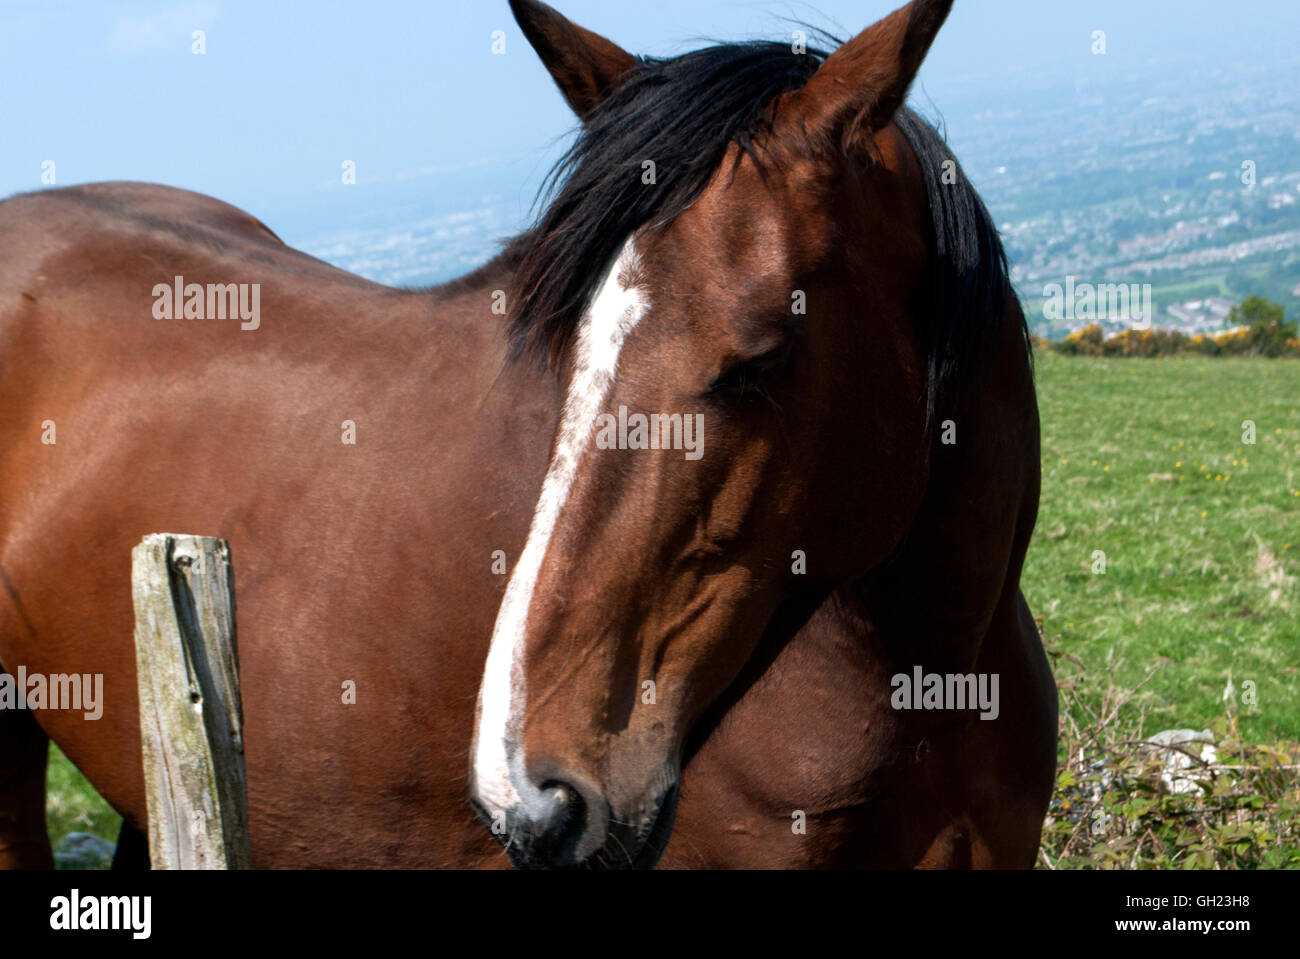 A chestnut horse with a white stripe on the face Stock Photo